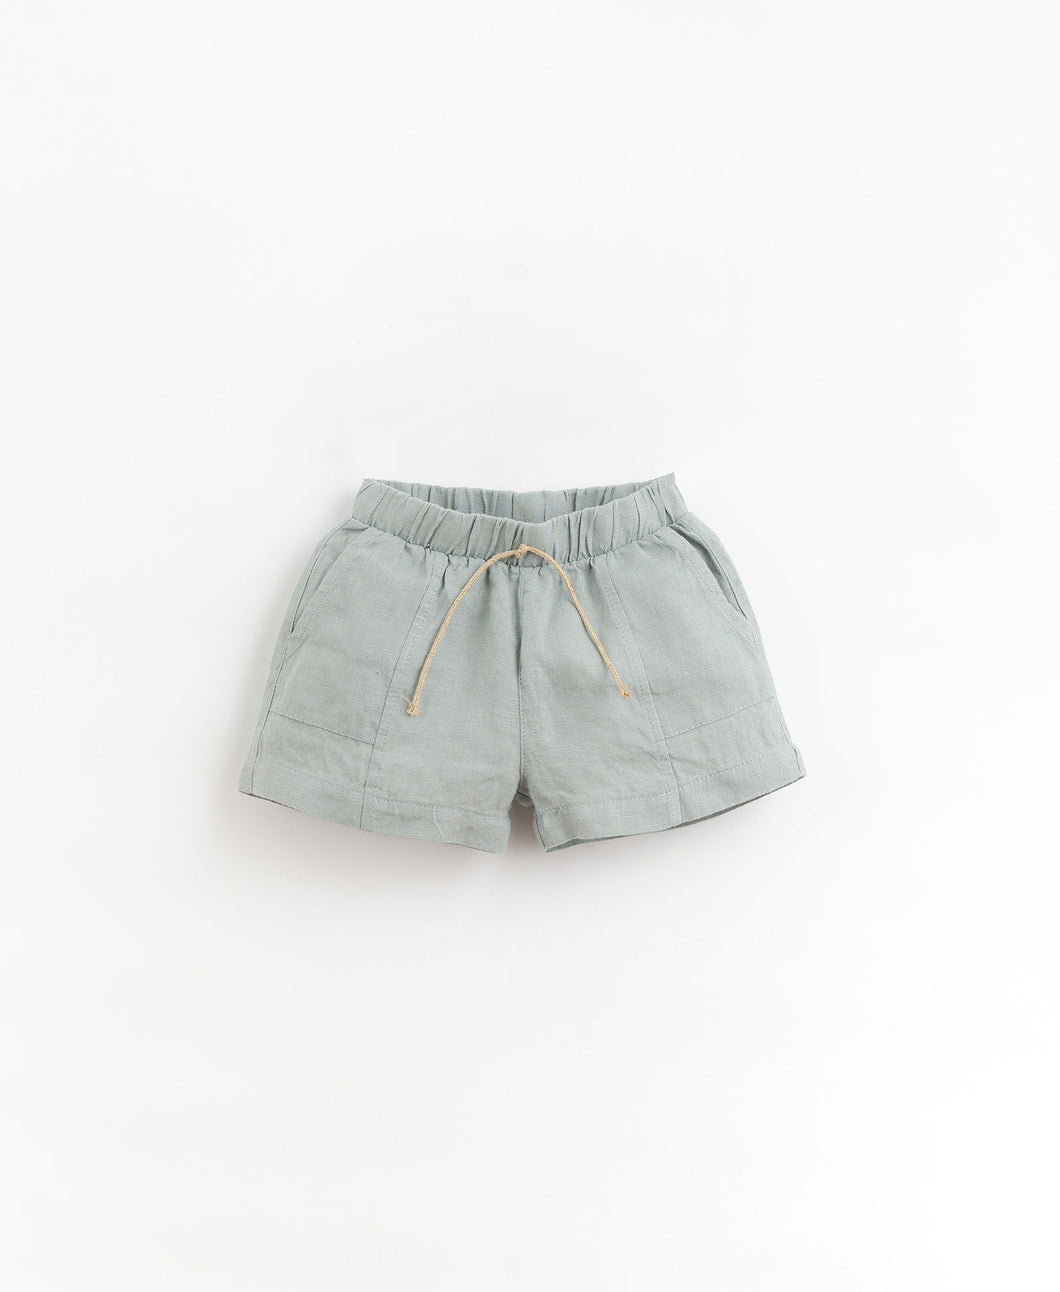 Play Up / BABY / Linen Shorts / Care